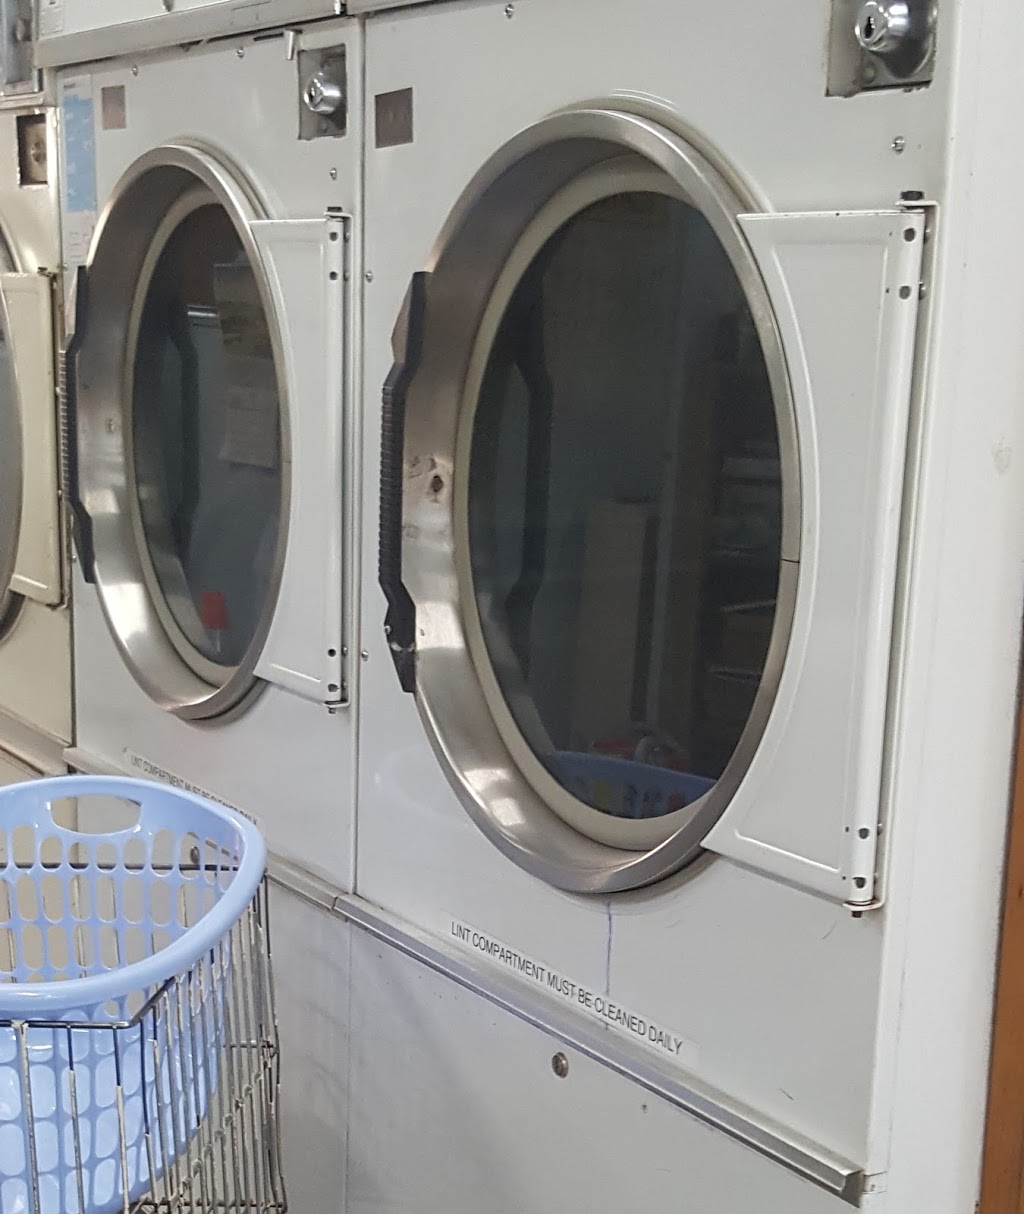 St Marys Coin Laundry | laundry | 228 Queen St, St Marys NSW 2760, Australia | 0296234709 OR +61 2 9623 4709